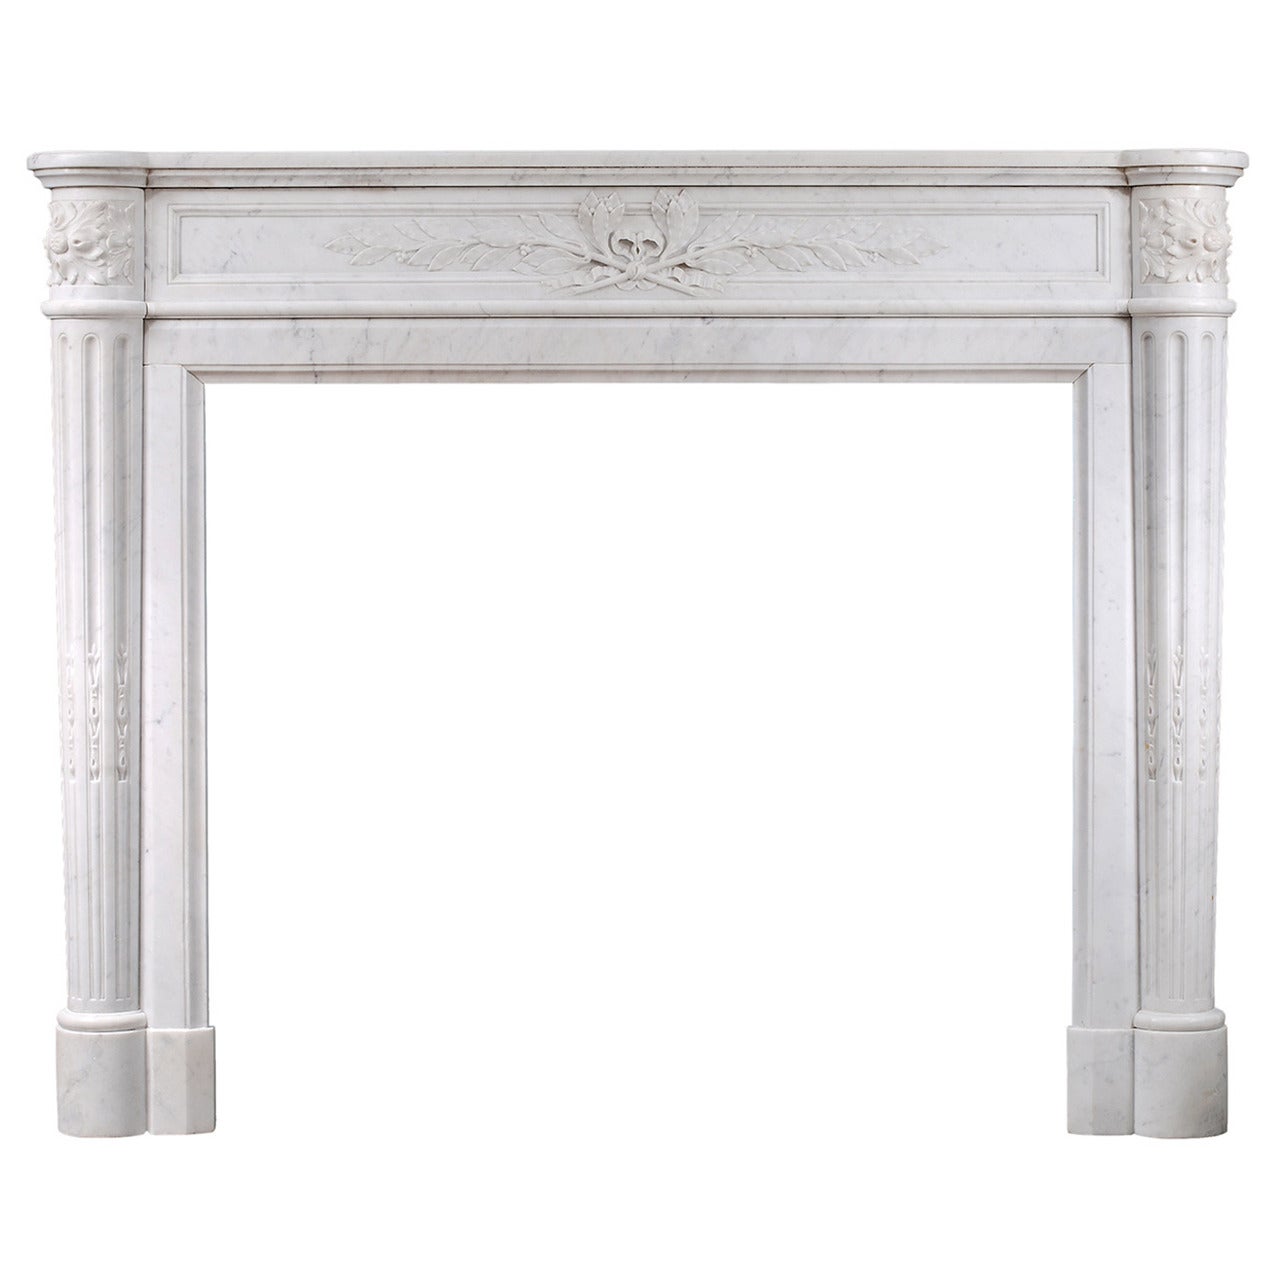 19th Century French Louis XVI Style Mantel Piece in Light Carrara Marble